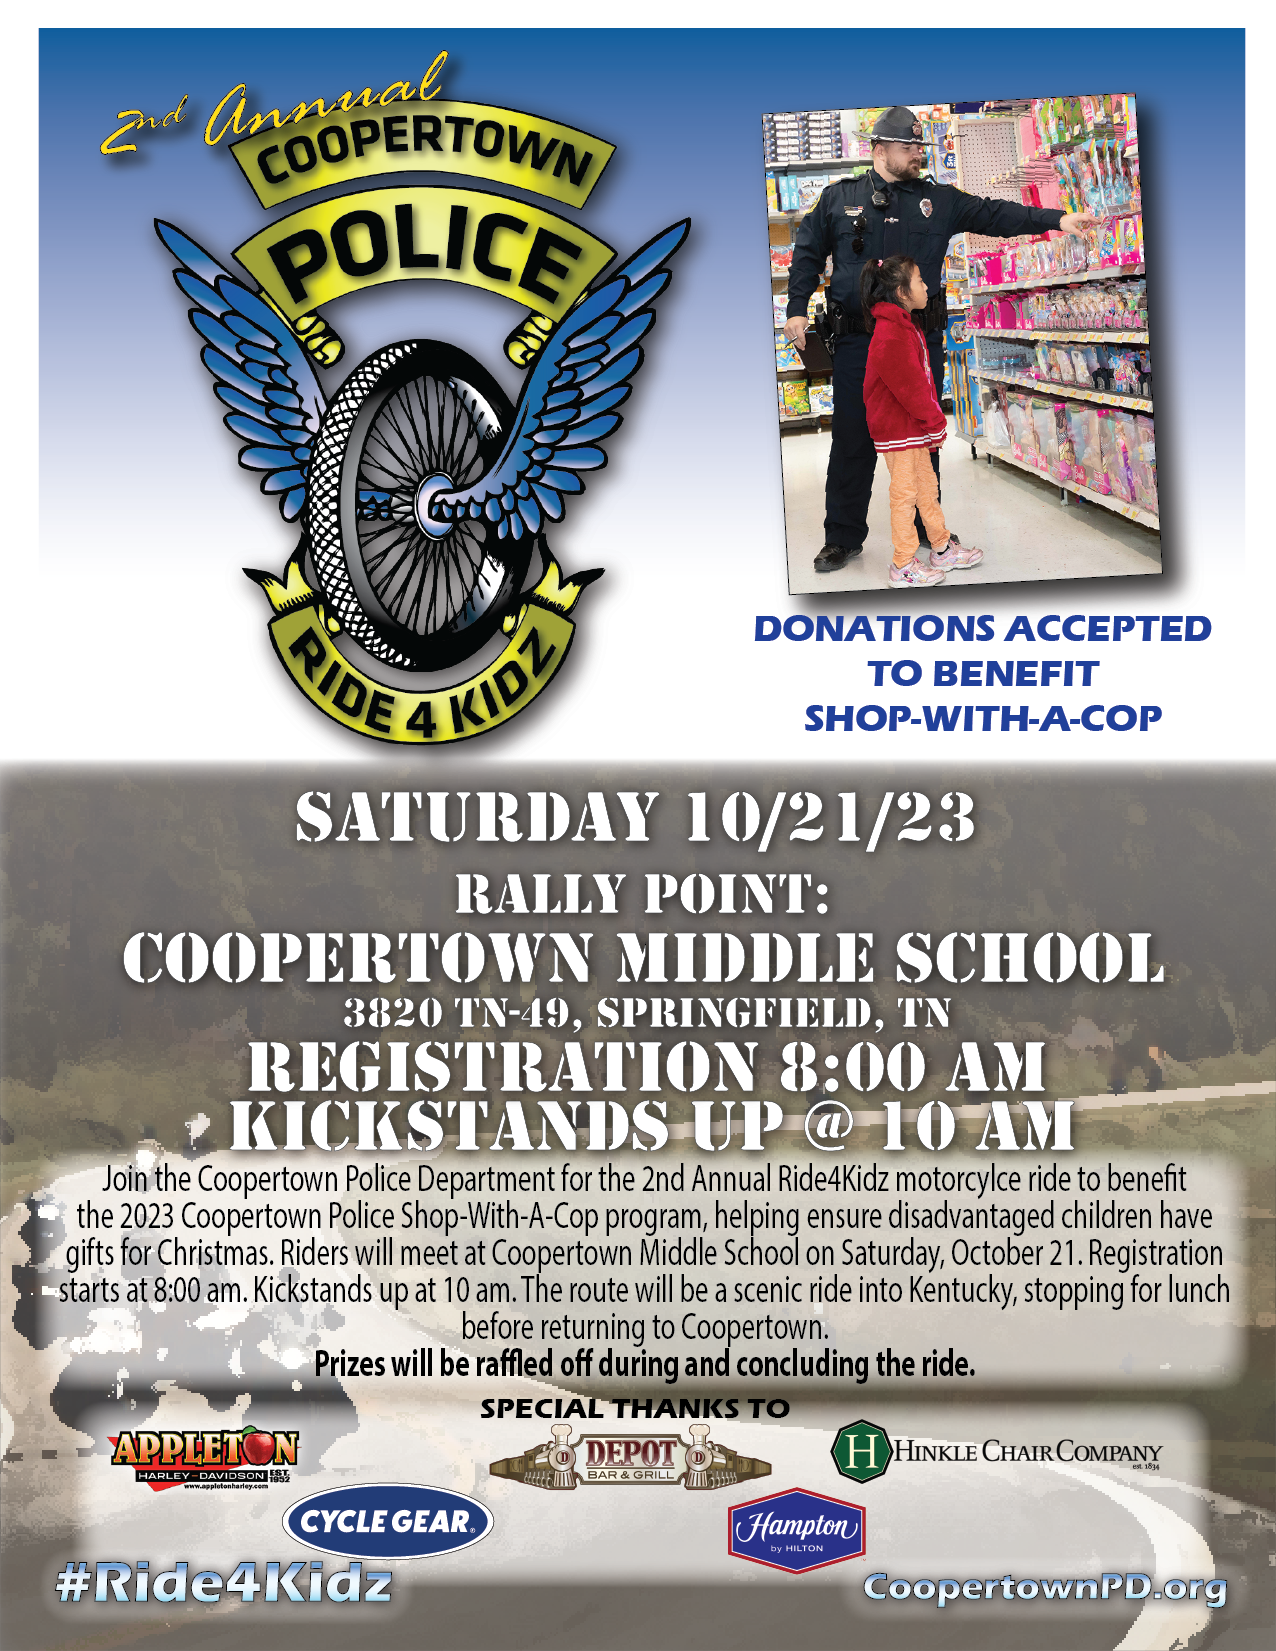 Coopertown Police Department’s 2nd Annual Ride4Kidz Motorcycle Ride